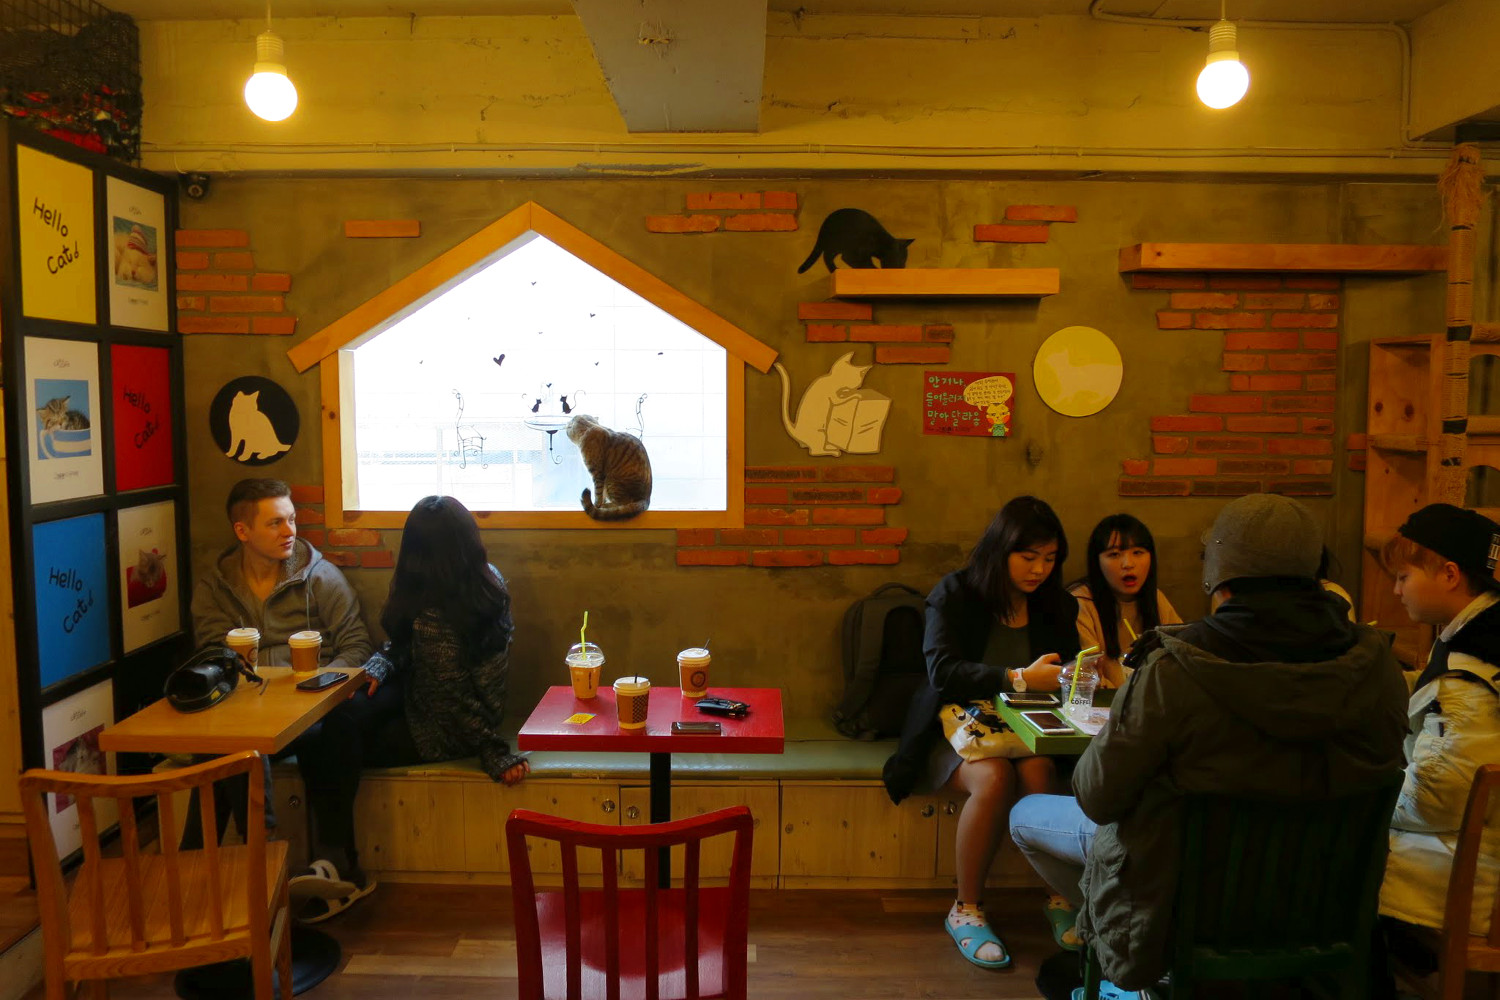 Many cat cafes provide good homes to stray kitties. Image by Megan Eaves / Lonely Planet